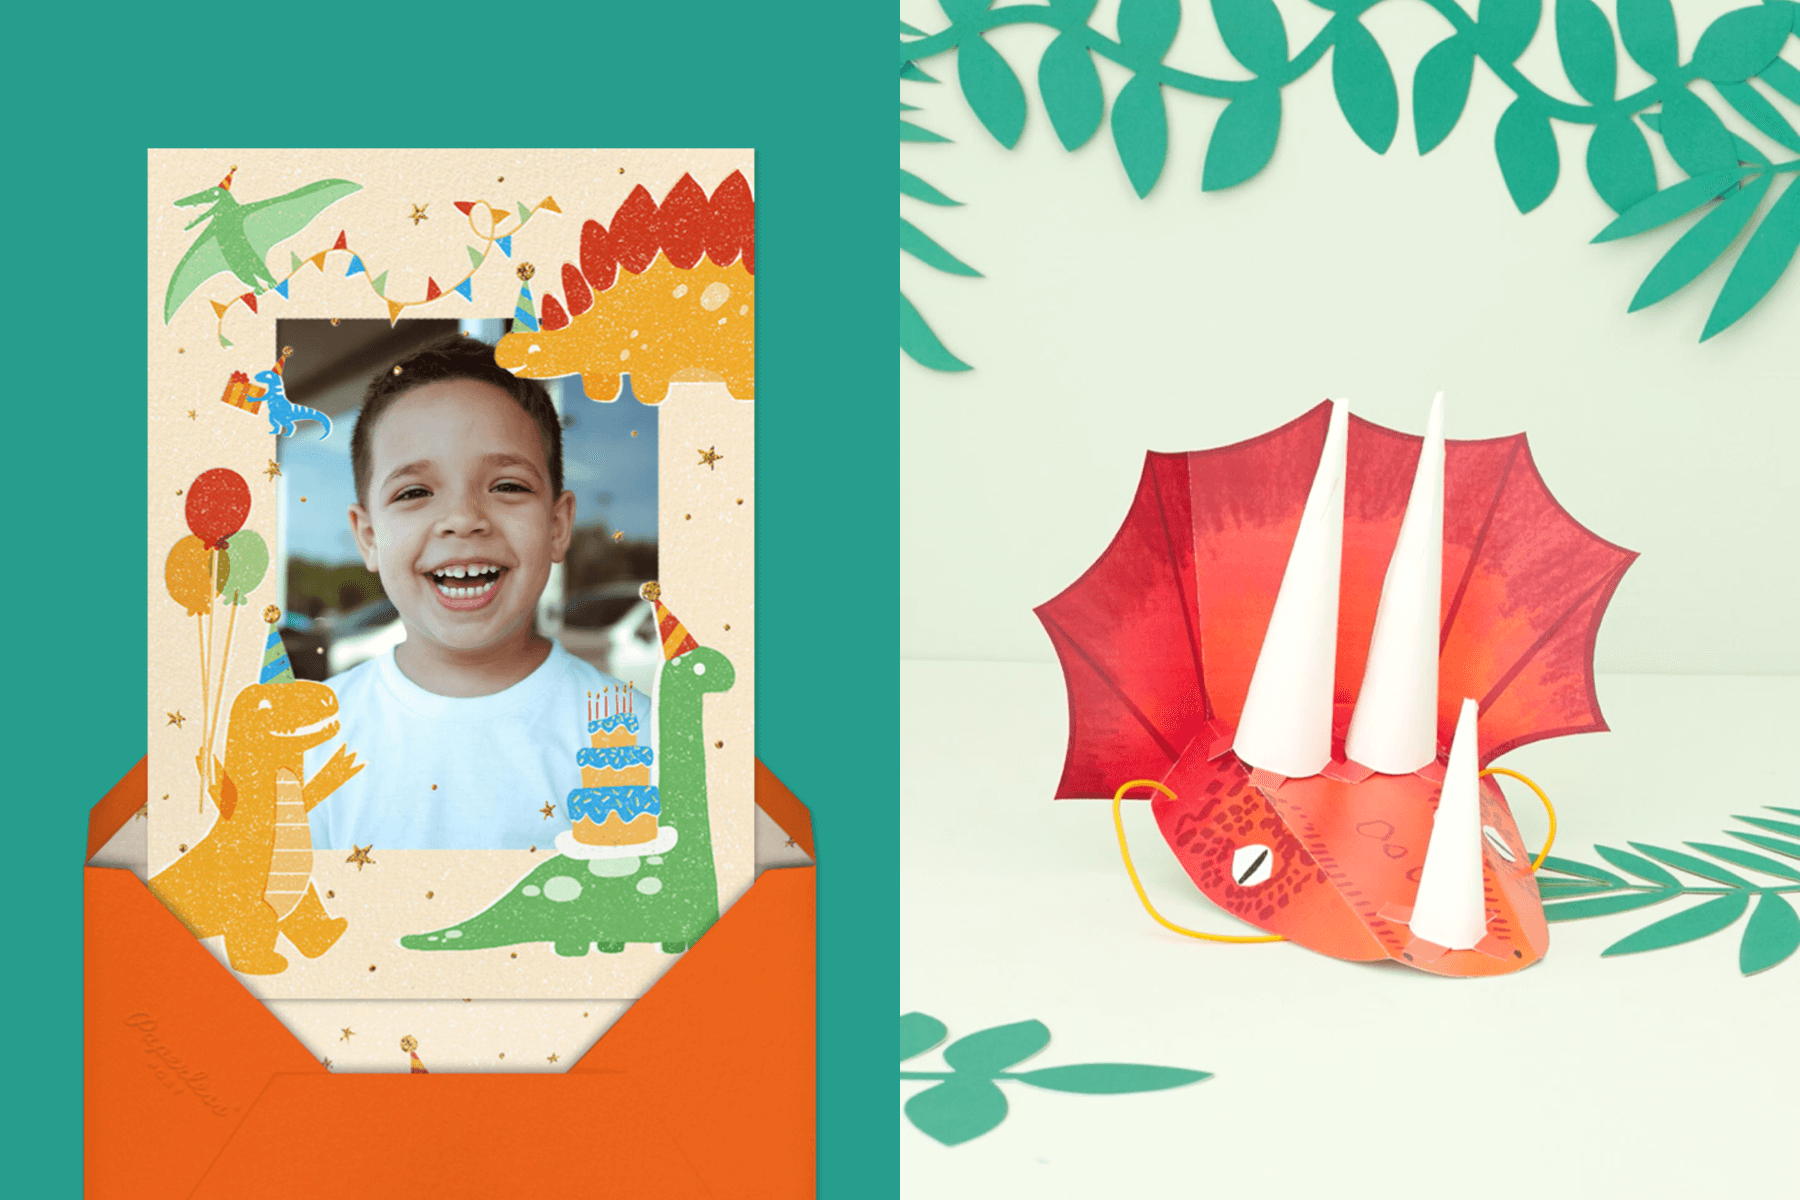 left: An invitation with a photo of a child and a border of dinosaurs in party hats. Right: A red Triceratops-shaped party hat.